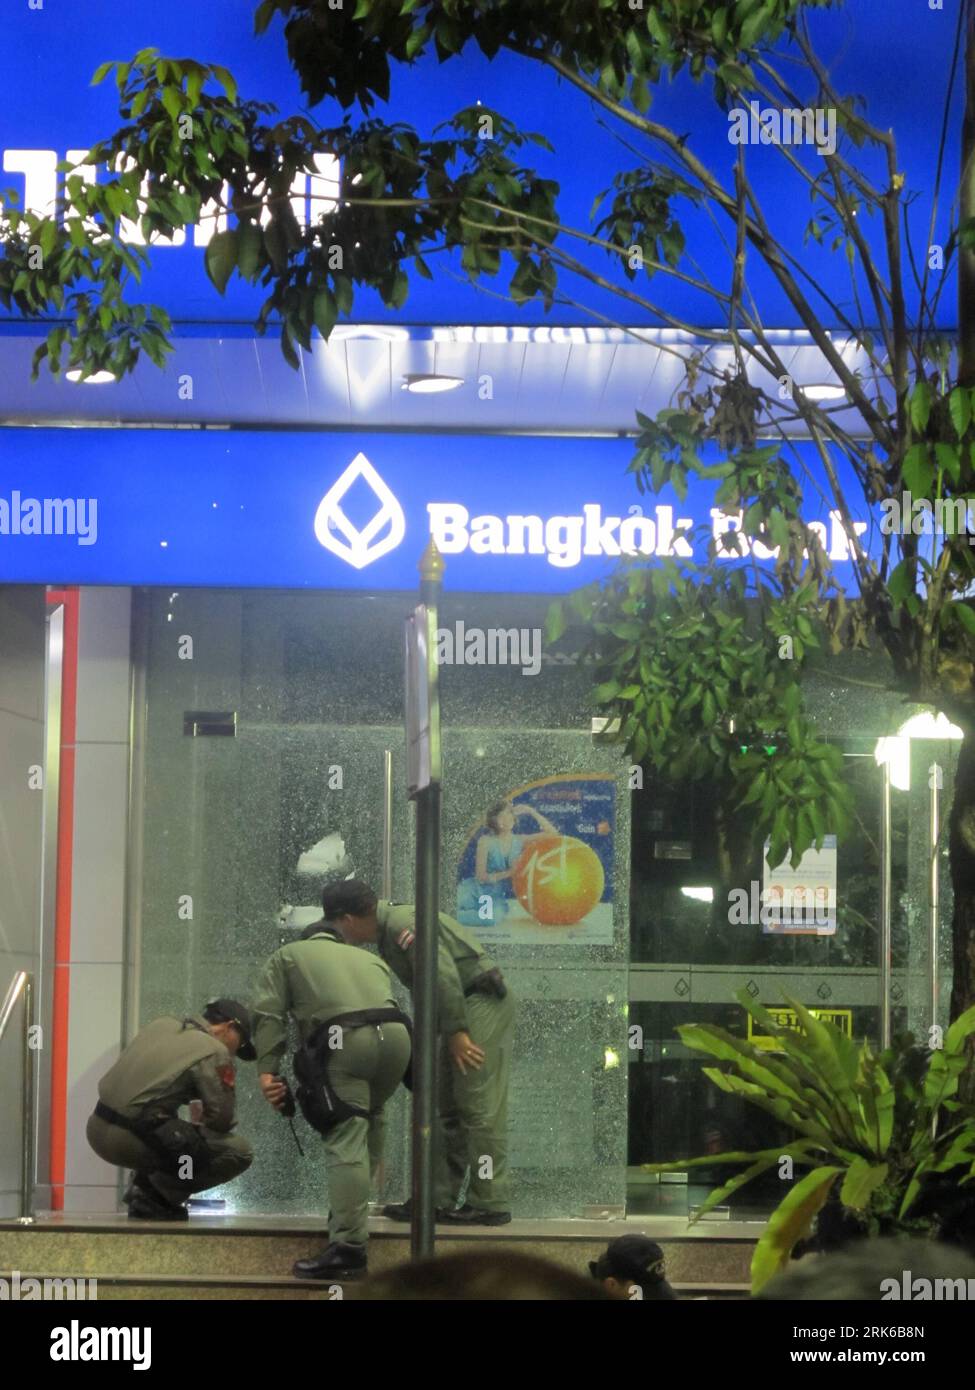 Bildnummer: 53822430  Datum: 27.02.2010  Copyright: imago/Xinhua (100227) -- BANGKOK, Feb. 27, 2010 (Xinhua) -- Police investigate an explosion case in front of a Bangkok Bank branch in central Bangkok, capital of Thailand, Feb. 27, 2010. A man on a motorcycle passed by and threw a hand grenade toward the branch bank at Silom road, Bangrak district, at about 9:30 p.m. on Saturday, but only hit the tree in front of the bank and exploded, leaving one person slightly injured. (Xinhua/Zhu Li) (gxr) (2)THAILAND-BANGKOK-EXPLOSION PUBLICATIONxNOTxINxCHN Explosion Thailand kbdig xsp 2010 hoch  o0 Bomb Stock Photo